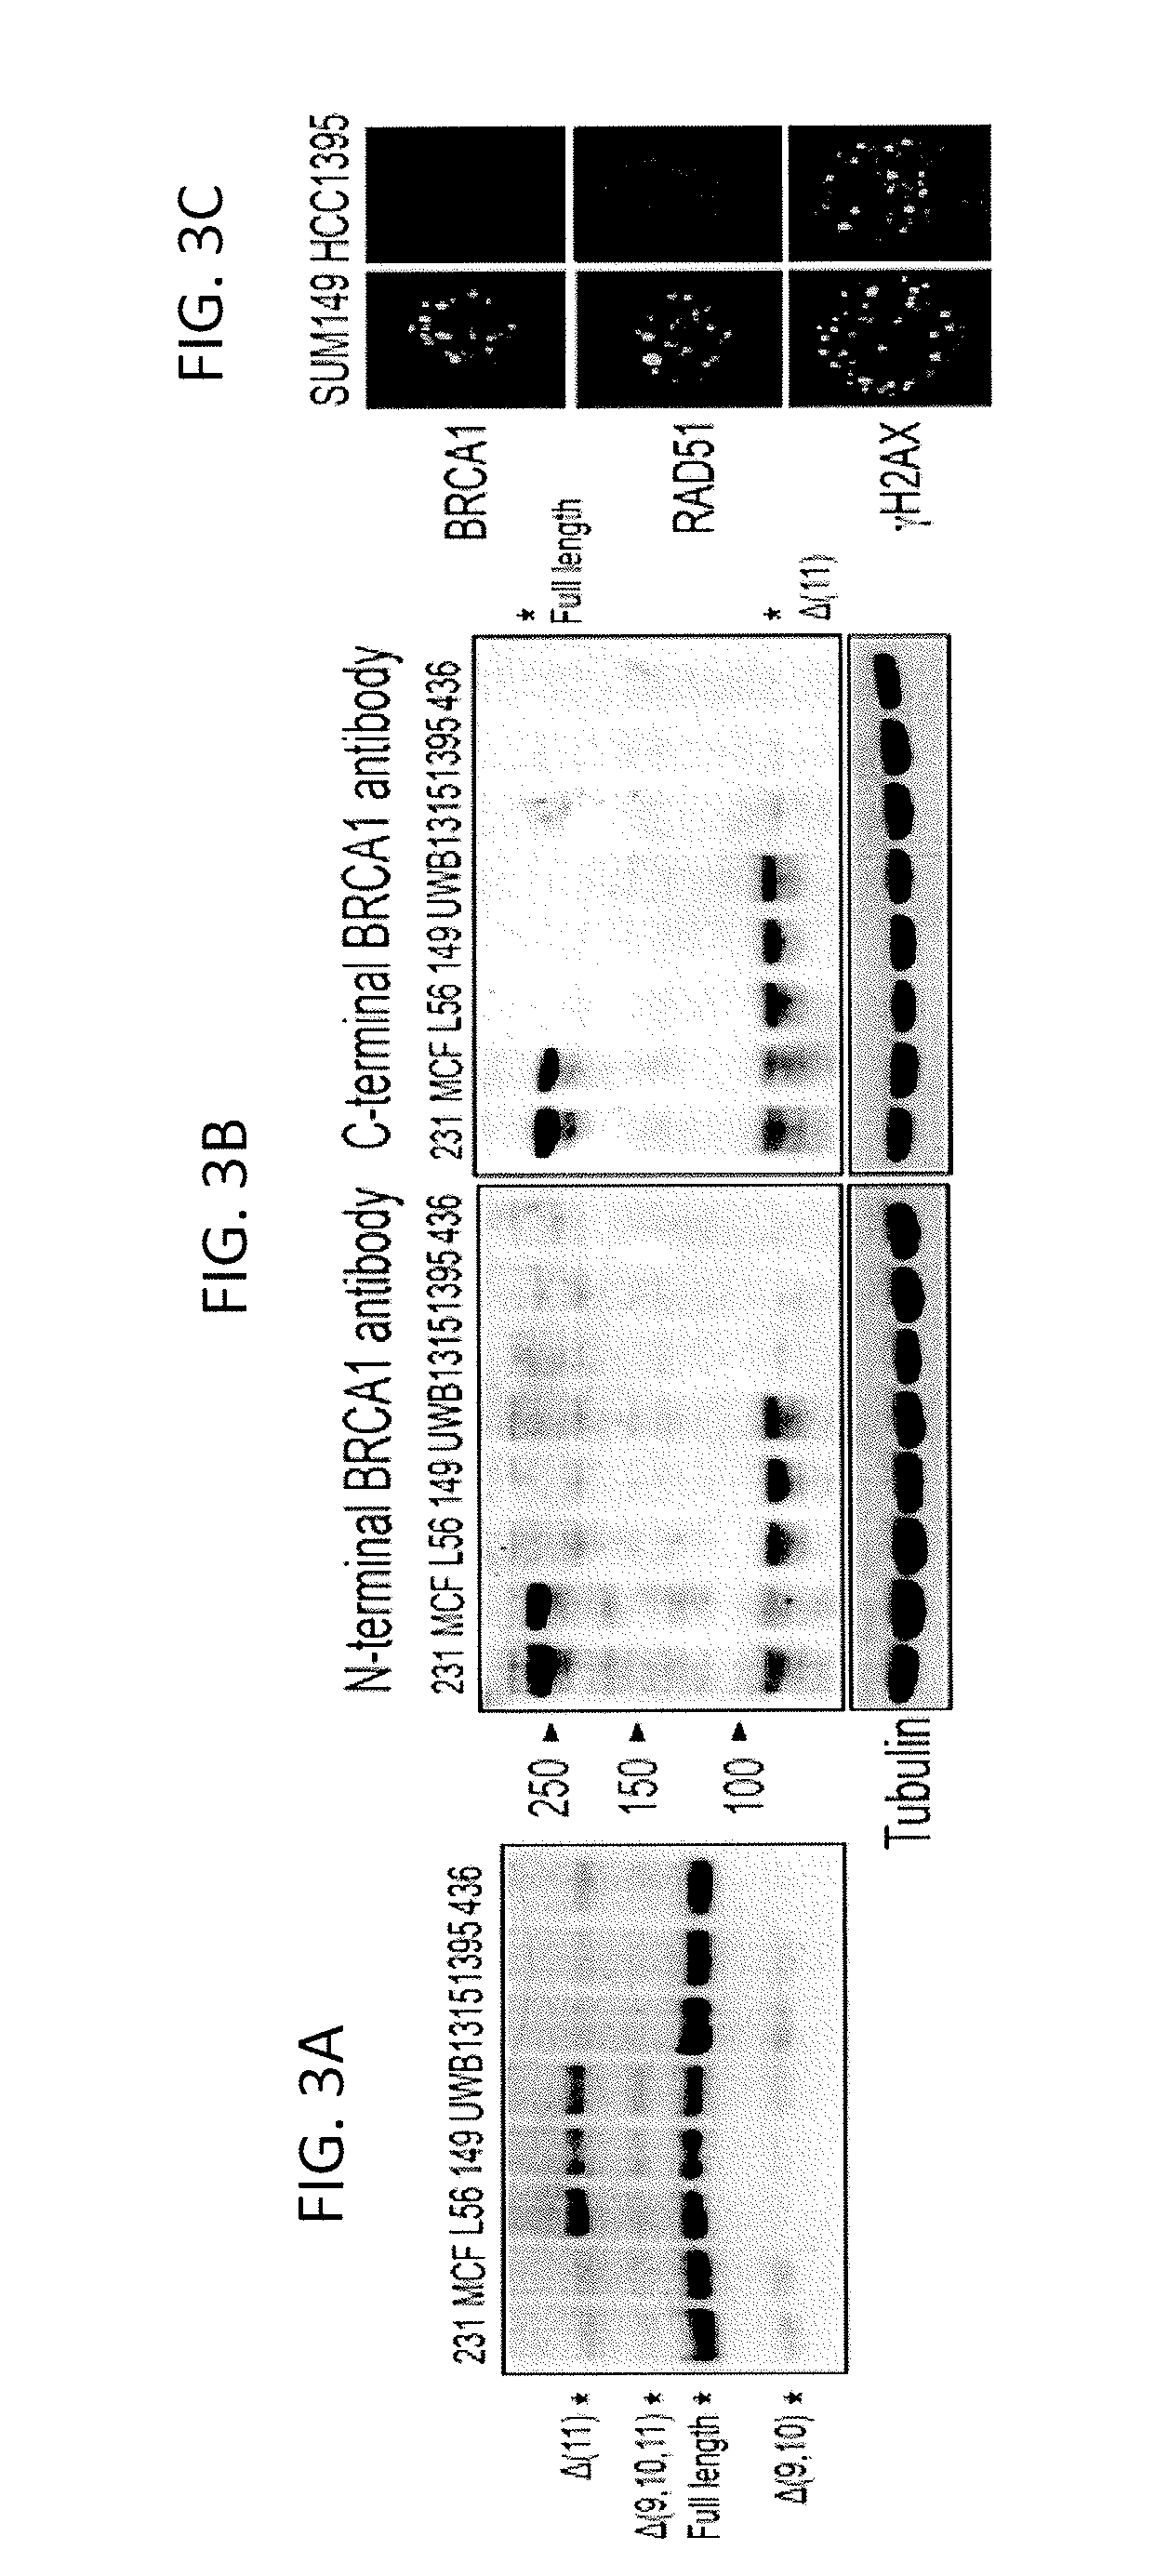 Methods for determining parp inhibitor and platinum resistance in cancer therapy